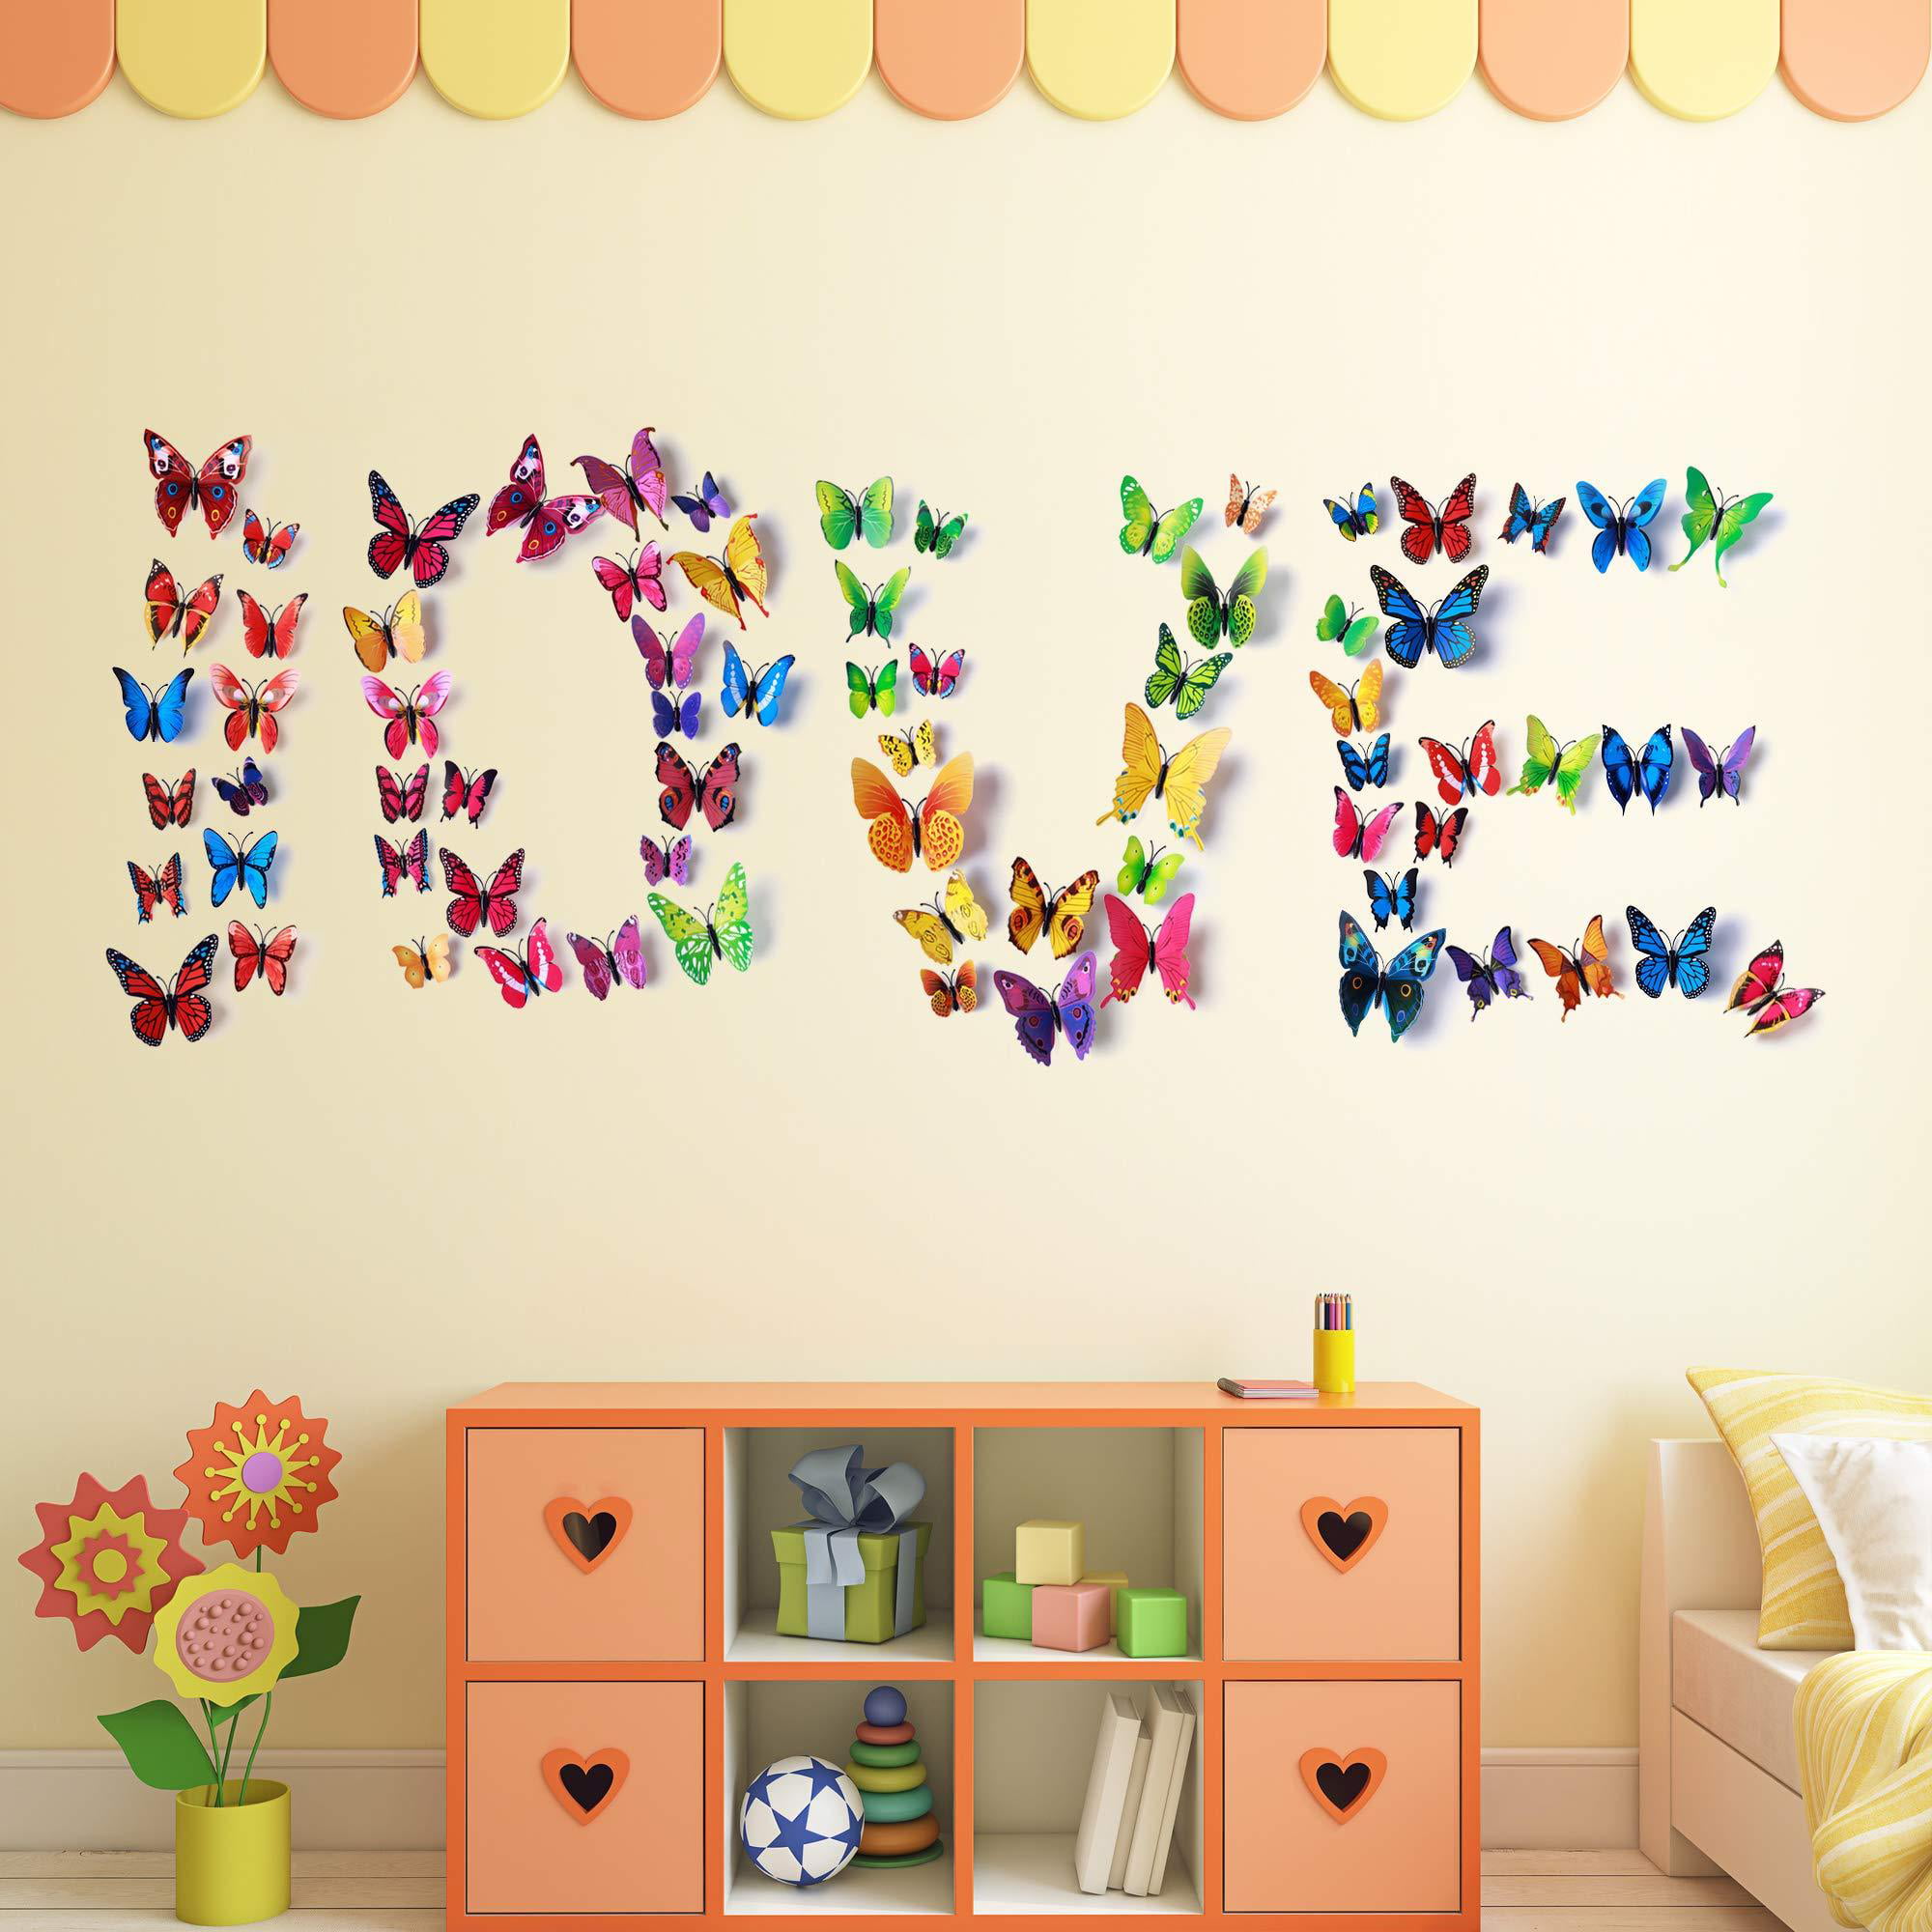 Metallic 3D Art Mural Decoration DIY Flying Decor for Kids Bedroom Home Party Nursery Classroom Offices Décor Creatiee 96Pcs Butterfly Wall Sticker Decal Removable & Multi-Style 